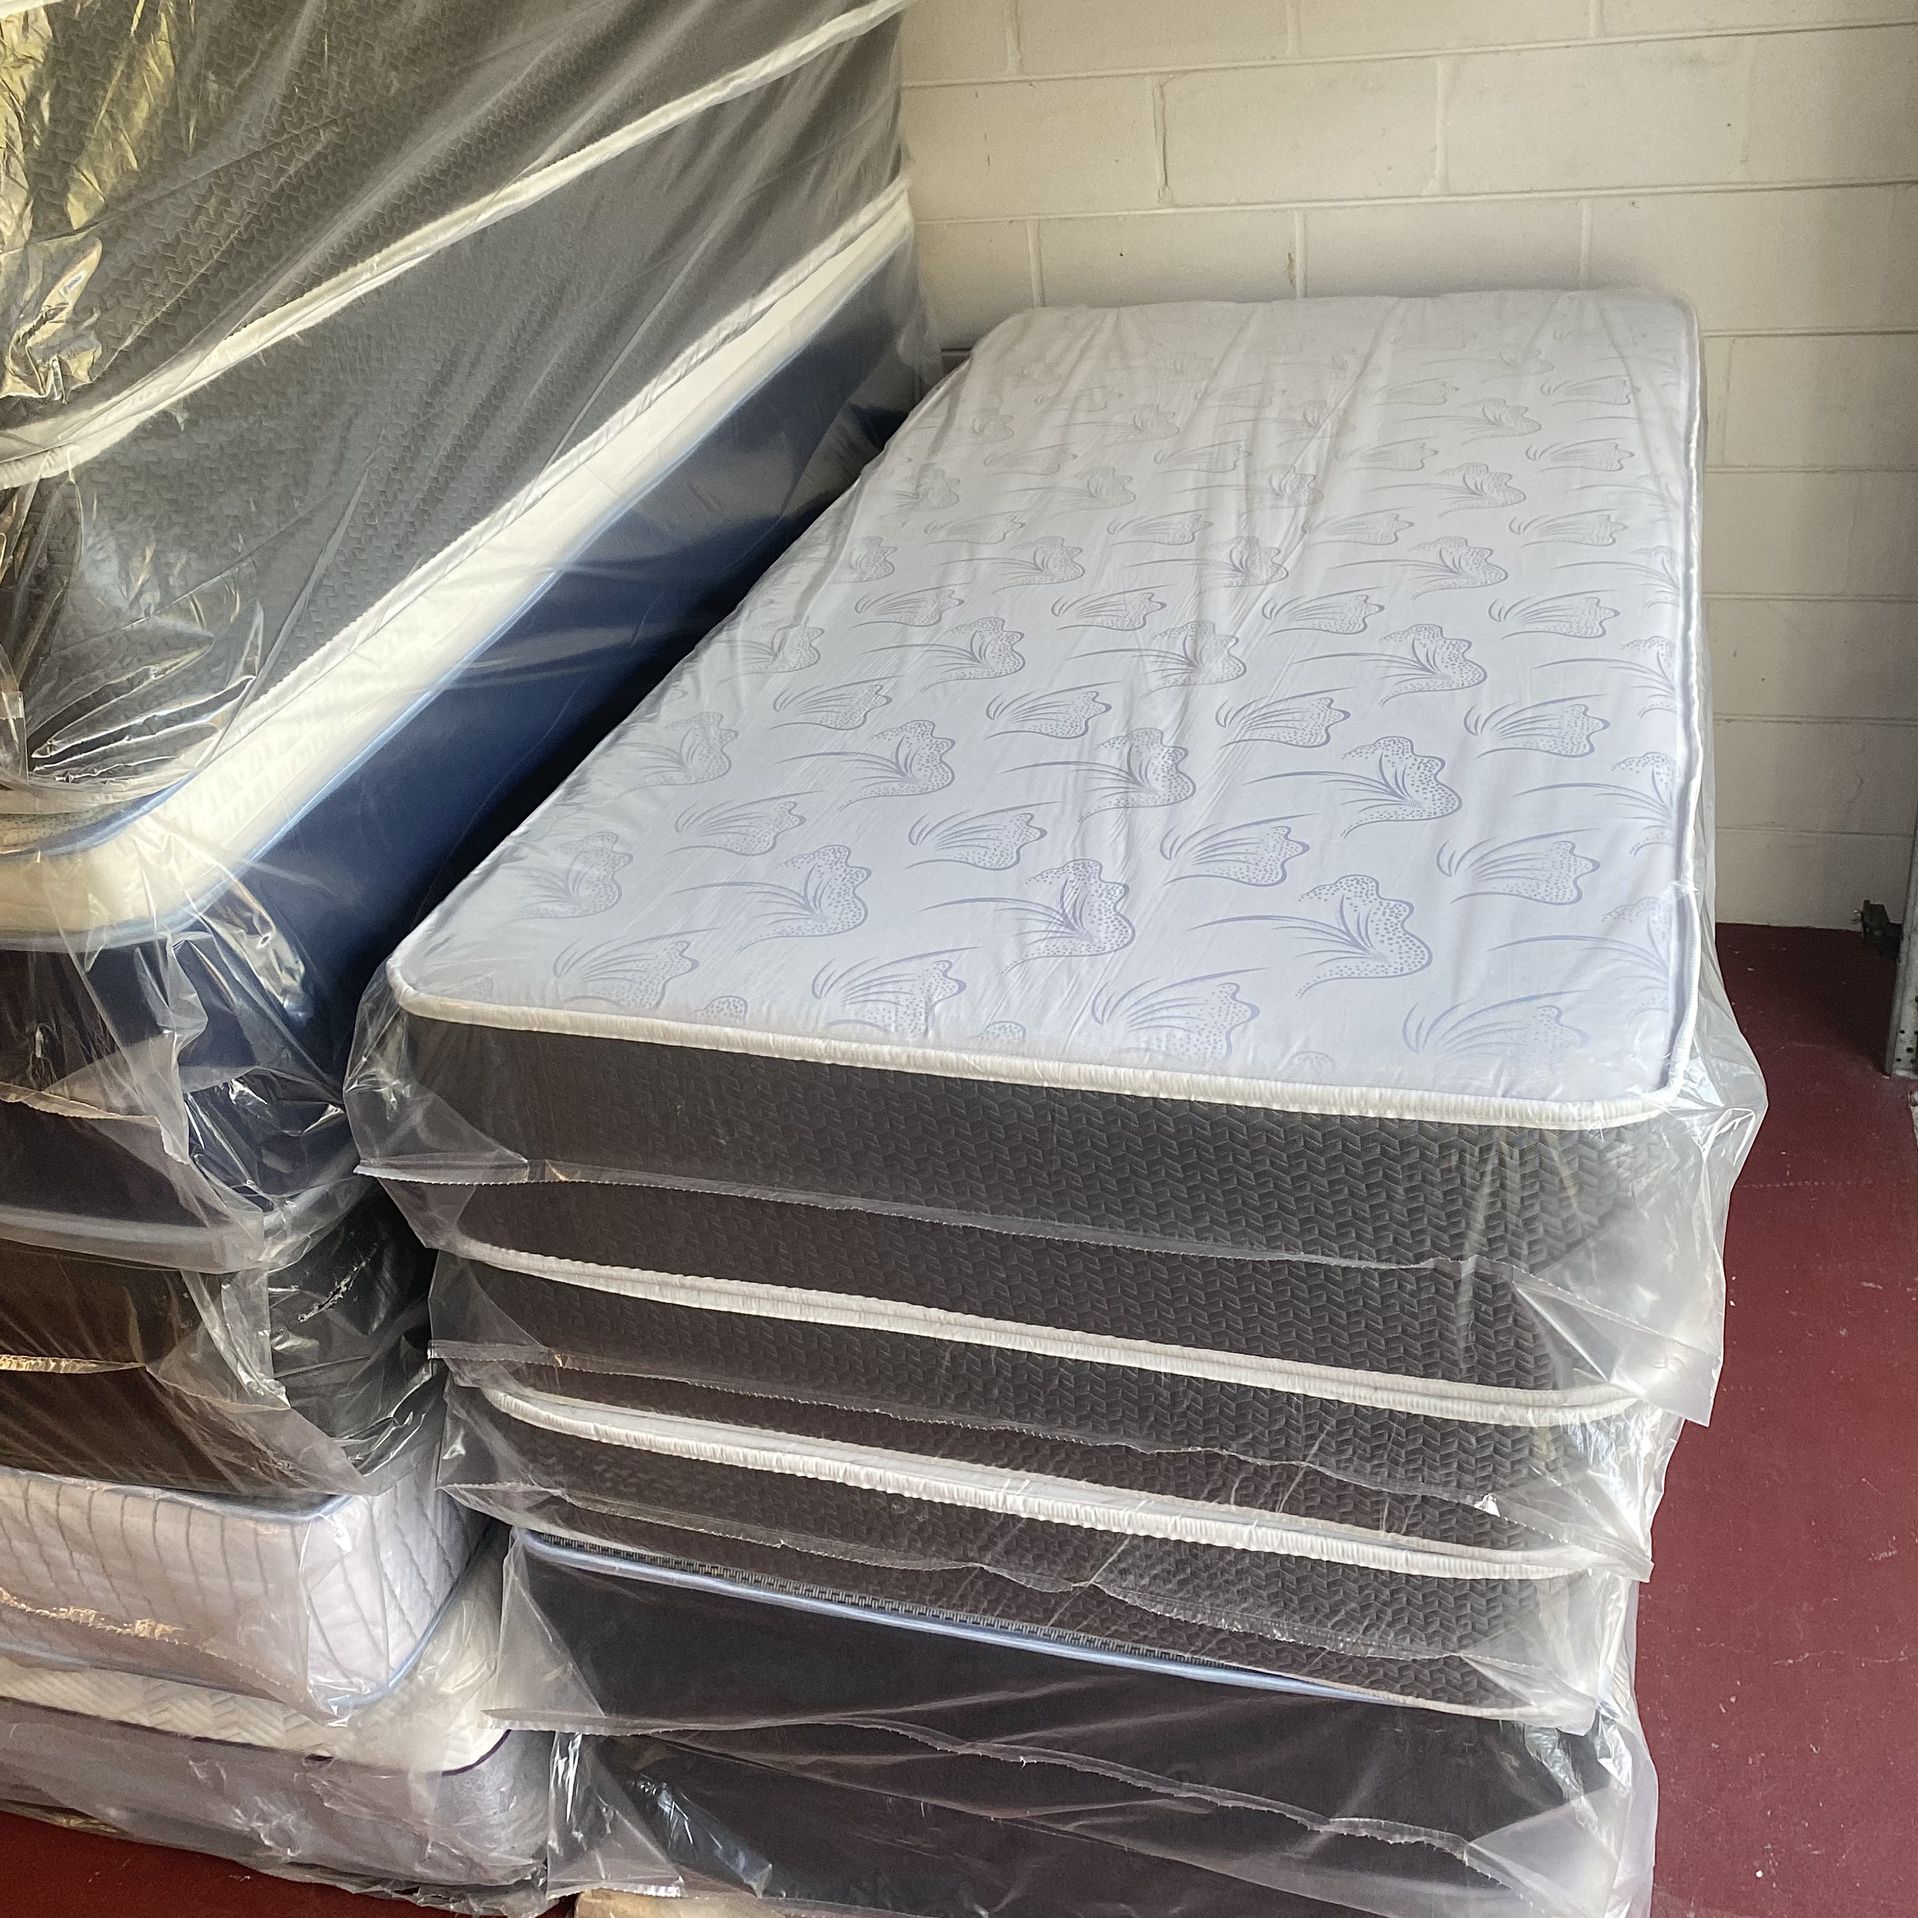 Twin Size Mattress 10 Inches Thick Excellent Comfort Also Available: Full, Queen And King New From Factory Delivery Available